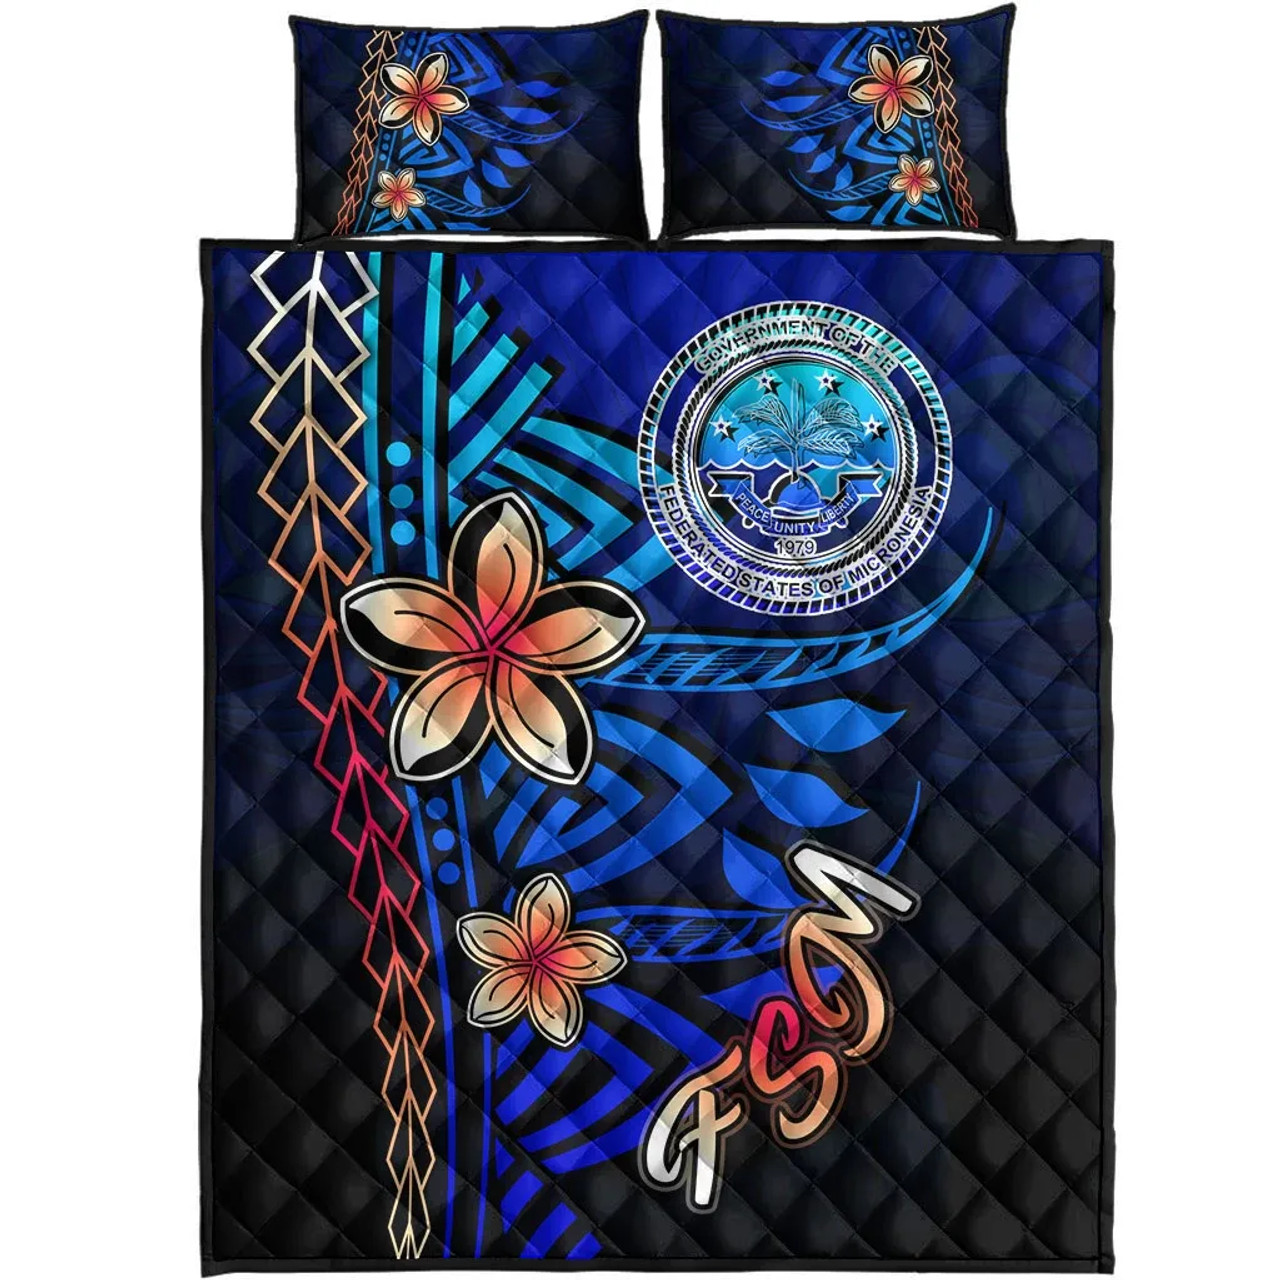 Federated States of Micronesia Quilt Bed Set - Vintage Tribal Mountain 5